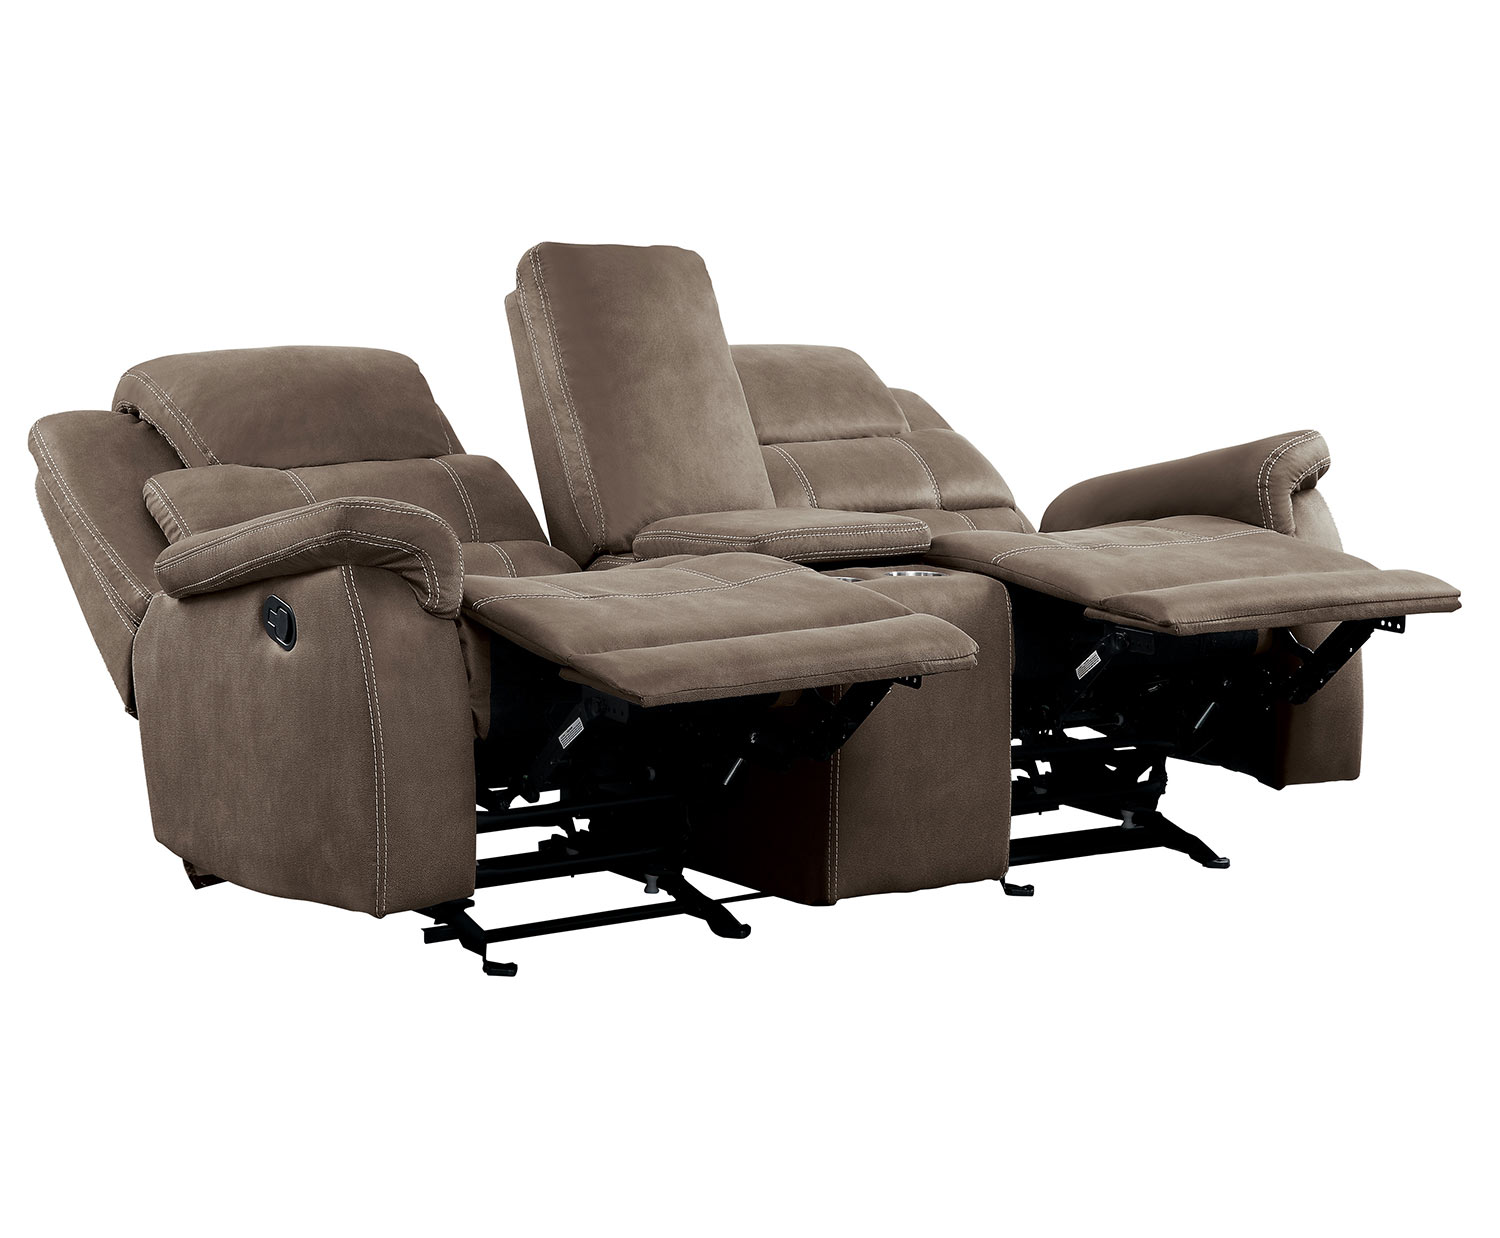 Homelegance Shola Double Glider Reclining Love Seat with Center Console - Brown